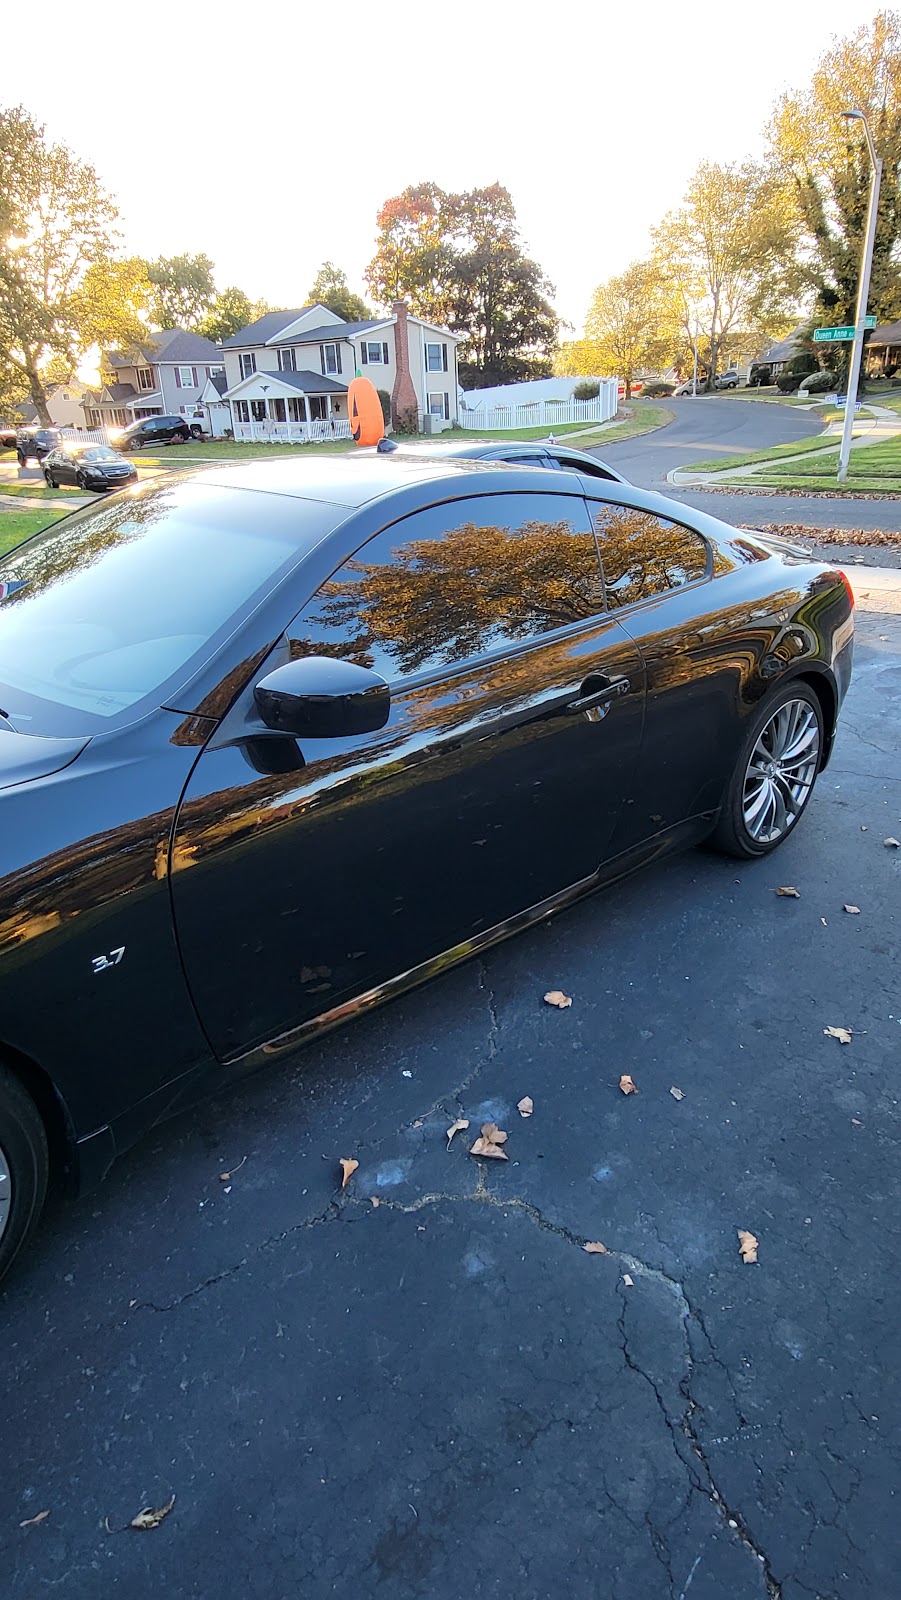 Shades of Gray Window Tinting | 185 Philmont Ave, Feasterville-Trevose, PA 19053 | Phone: (215) 357-3001